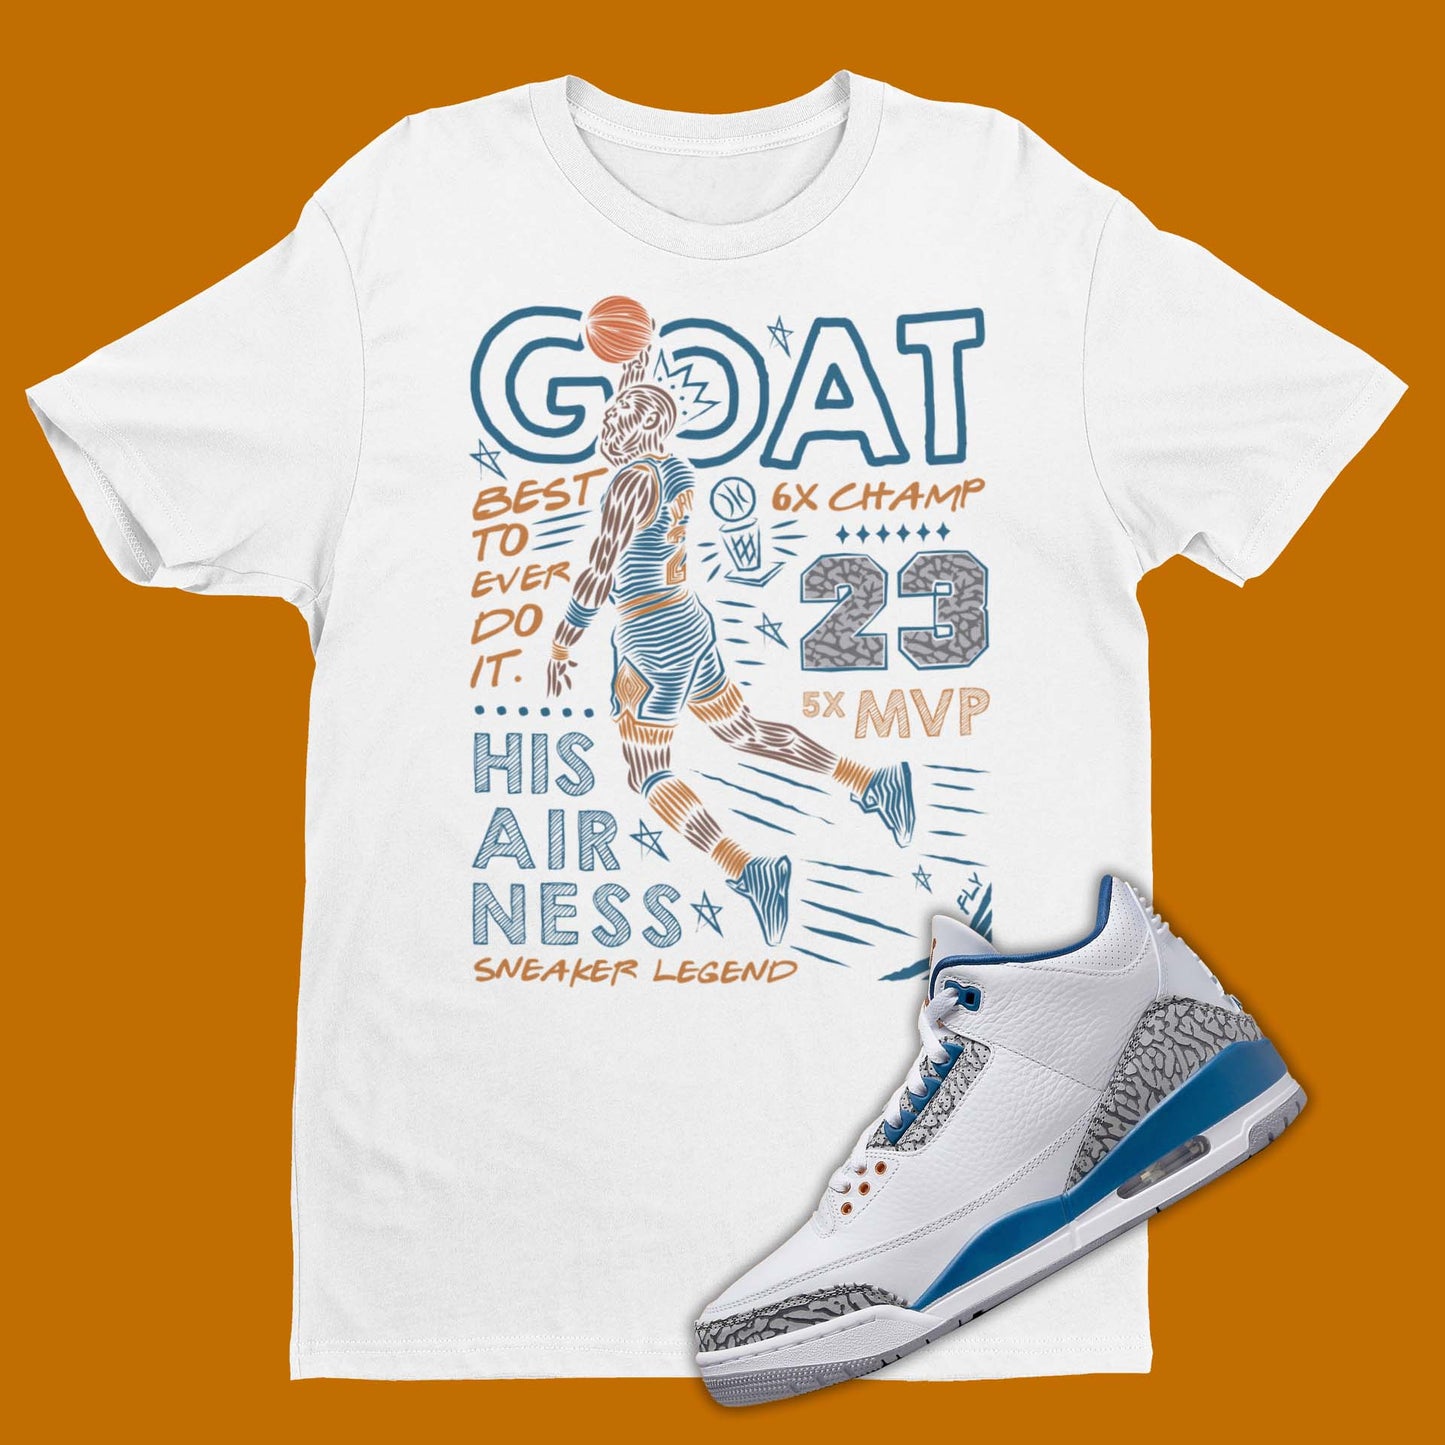 The perfect GOAT Michael Jordan shirt to match your sneakers! Our Match Jordan 3 t-shirt is made to compliment your kicks. Bring your sneakers to the next level with this Wizards Air Jordan 3 shirt. Match and feel trendy with this graphic tee!